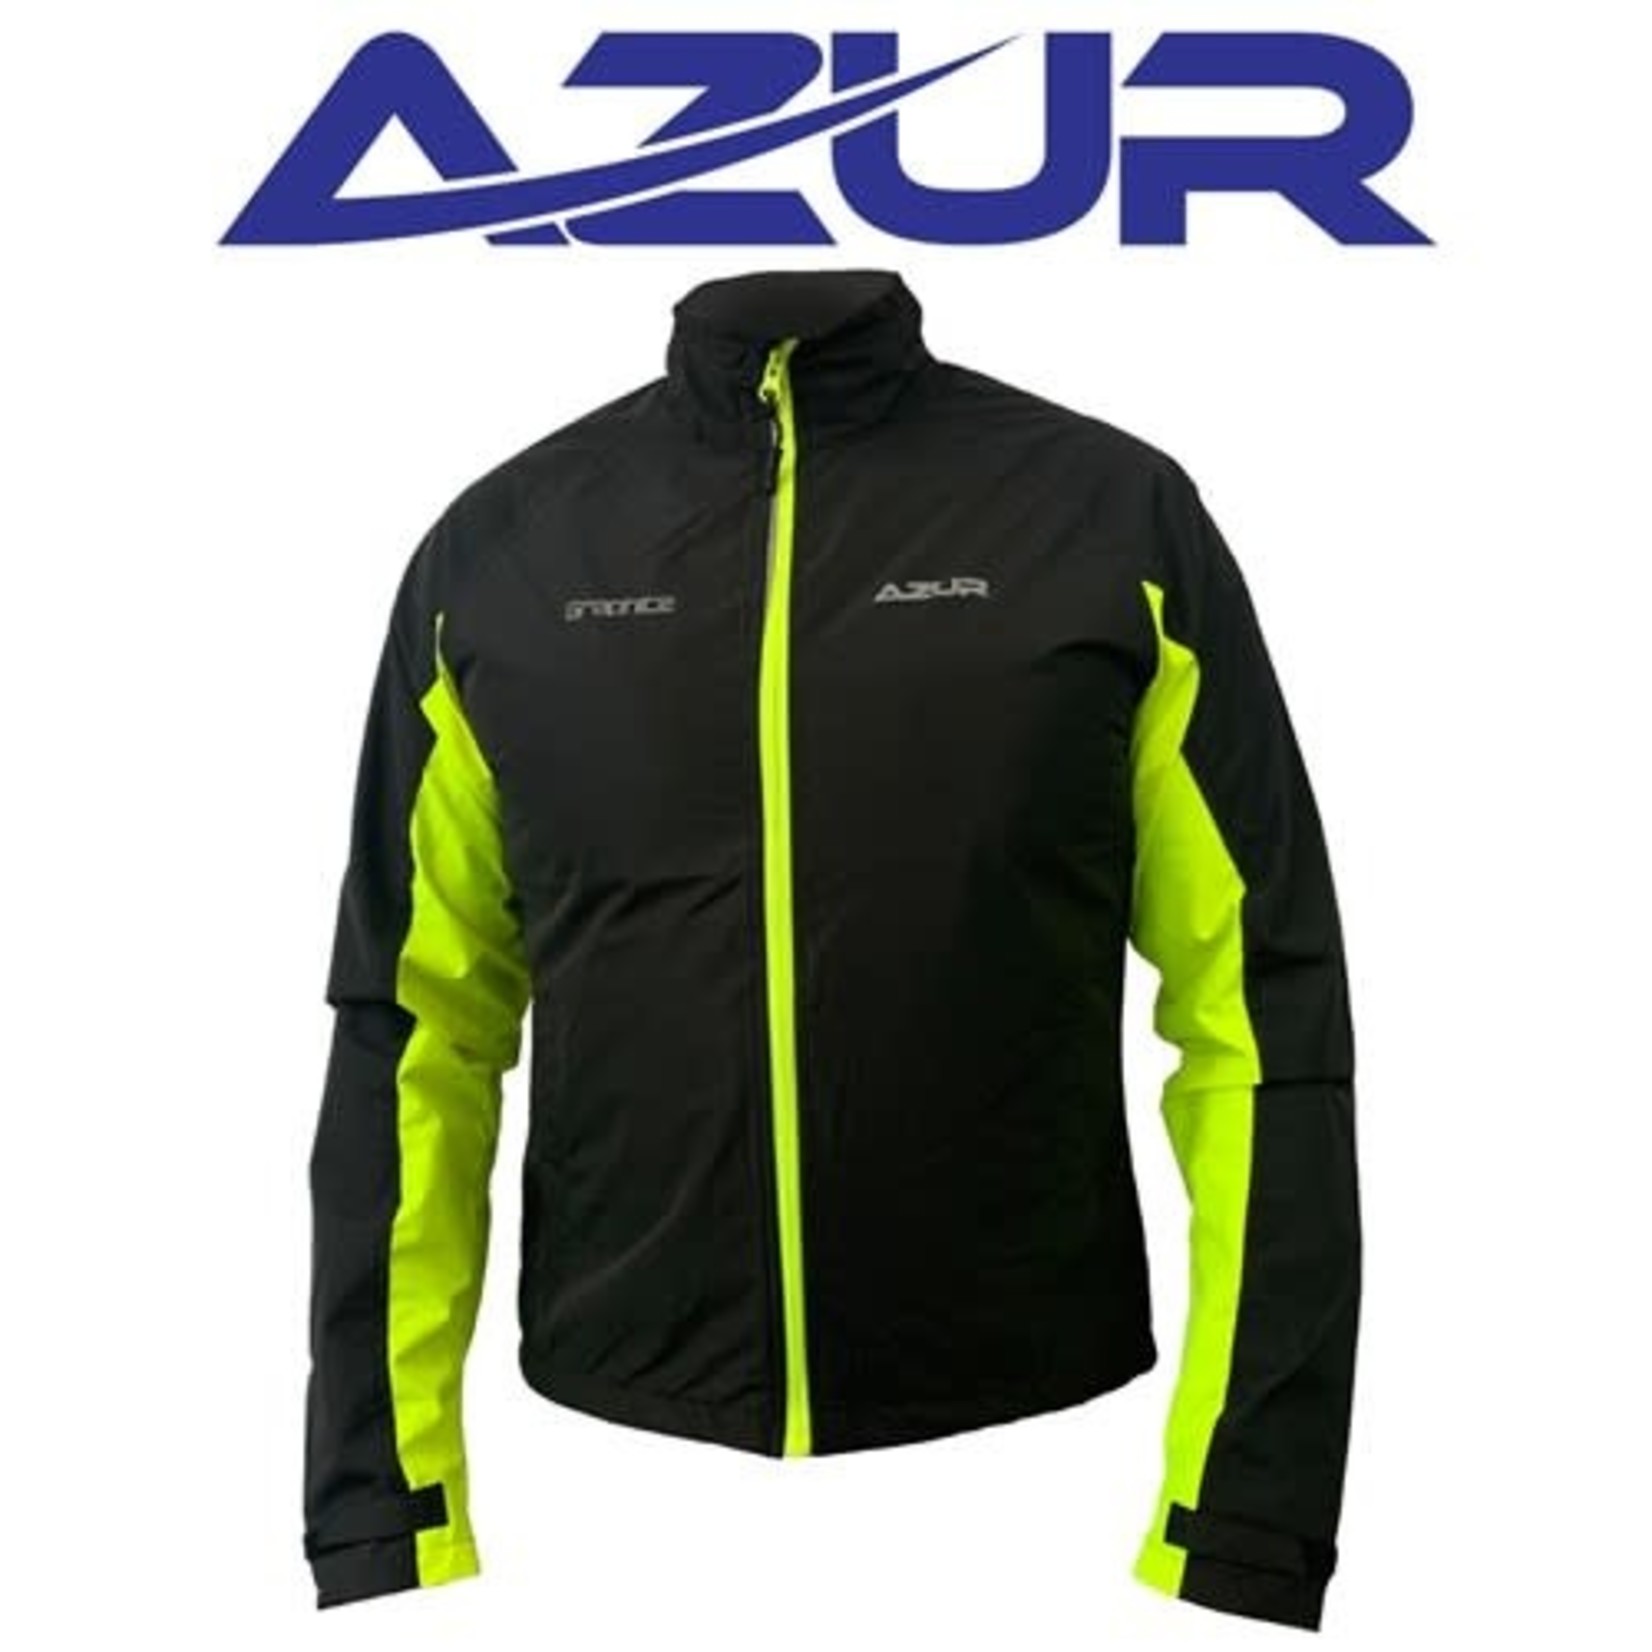 Azur Azur Bike/Cycling Graphite Jacket Polyster Water Resistant Dual Layered Fabric